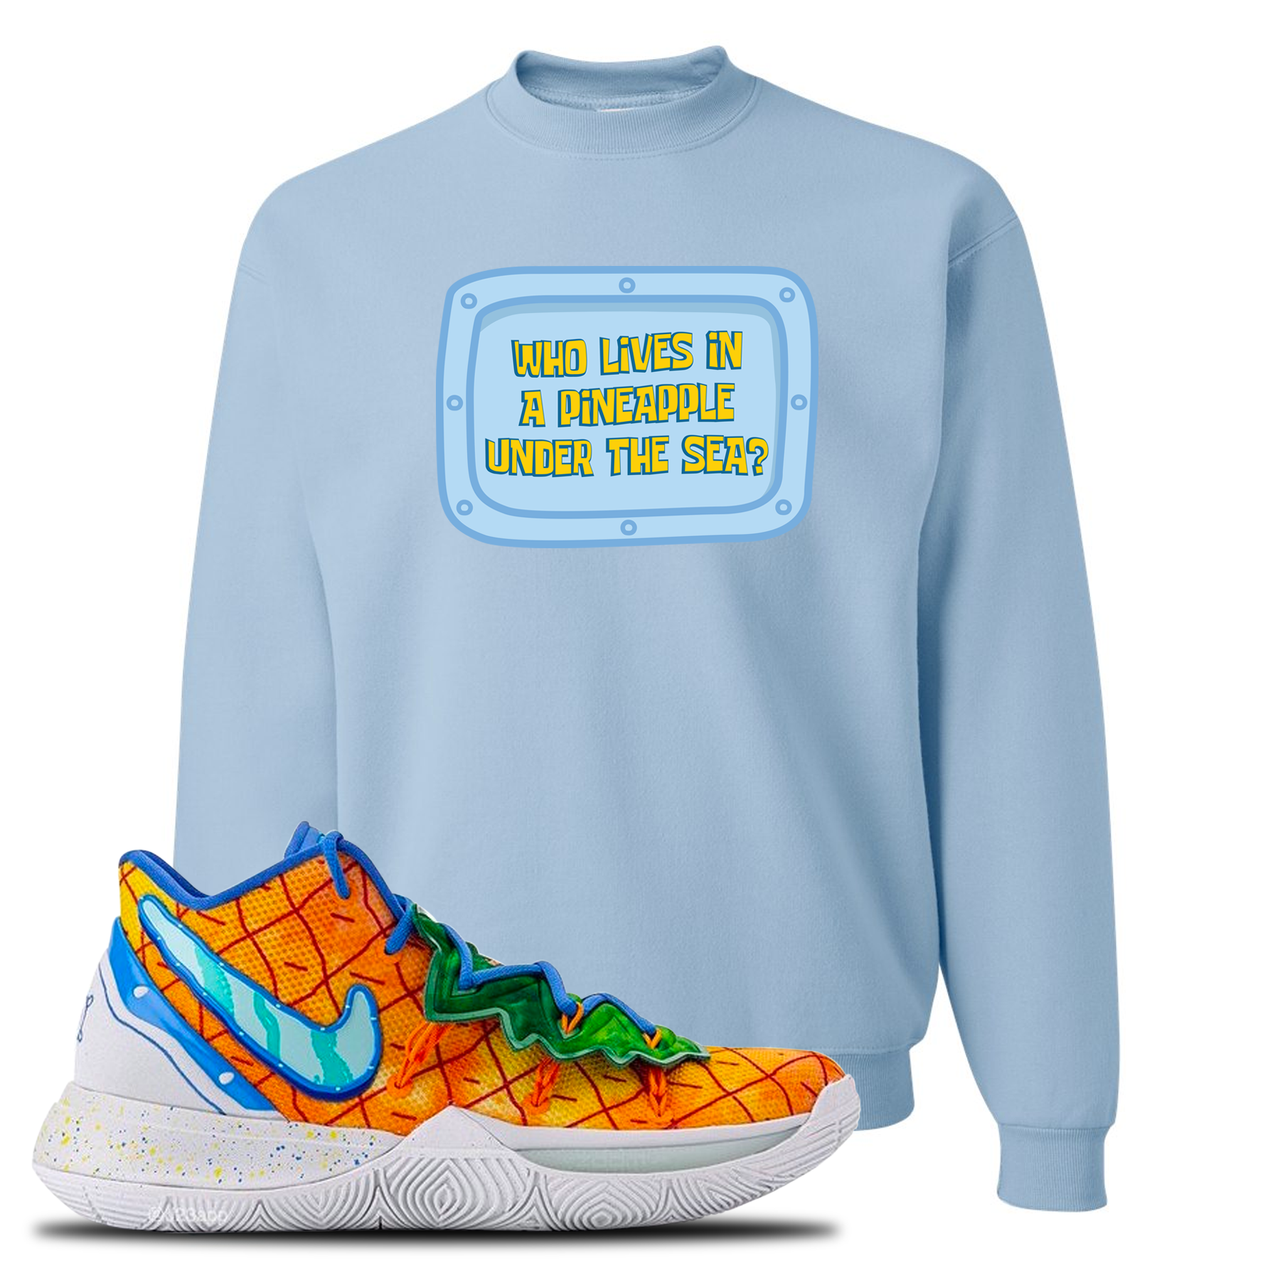 Kyrie 5 Pineapple House Who Lives in a Pineapple Under the Sea? Sky Blue Sneaker Hook Up Crewneck Sweatshirt